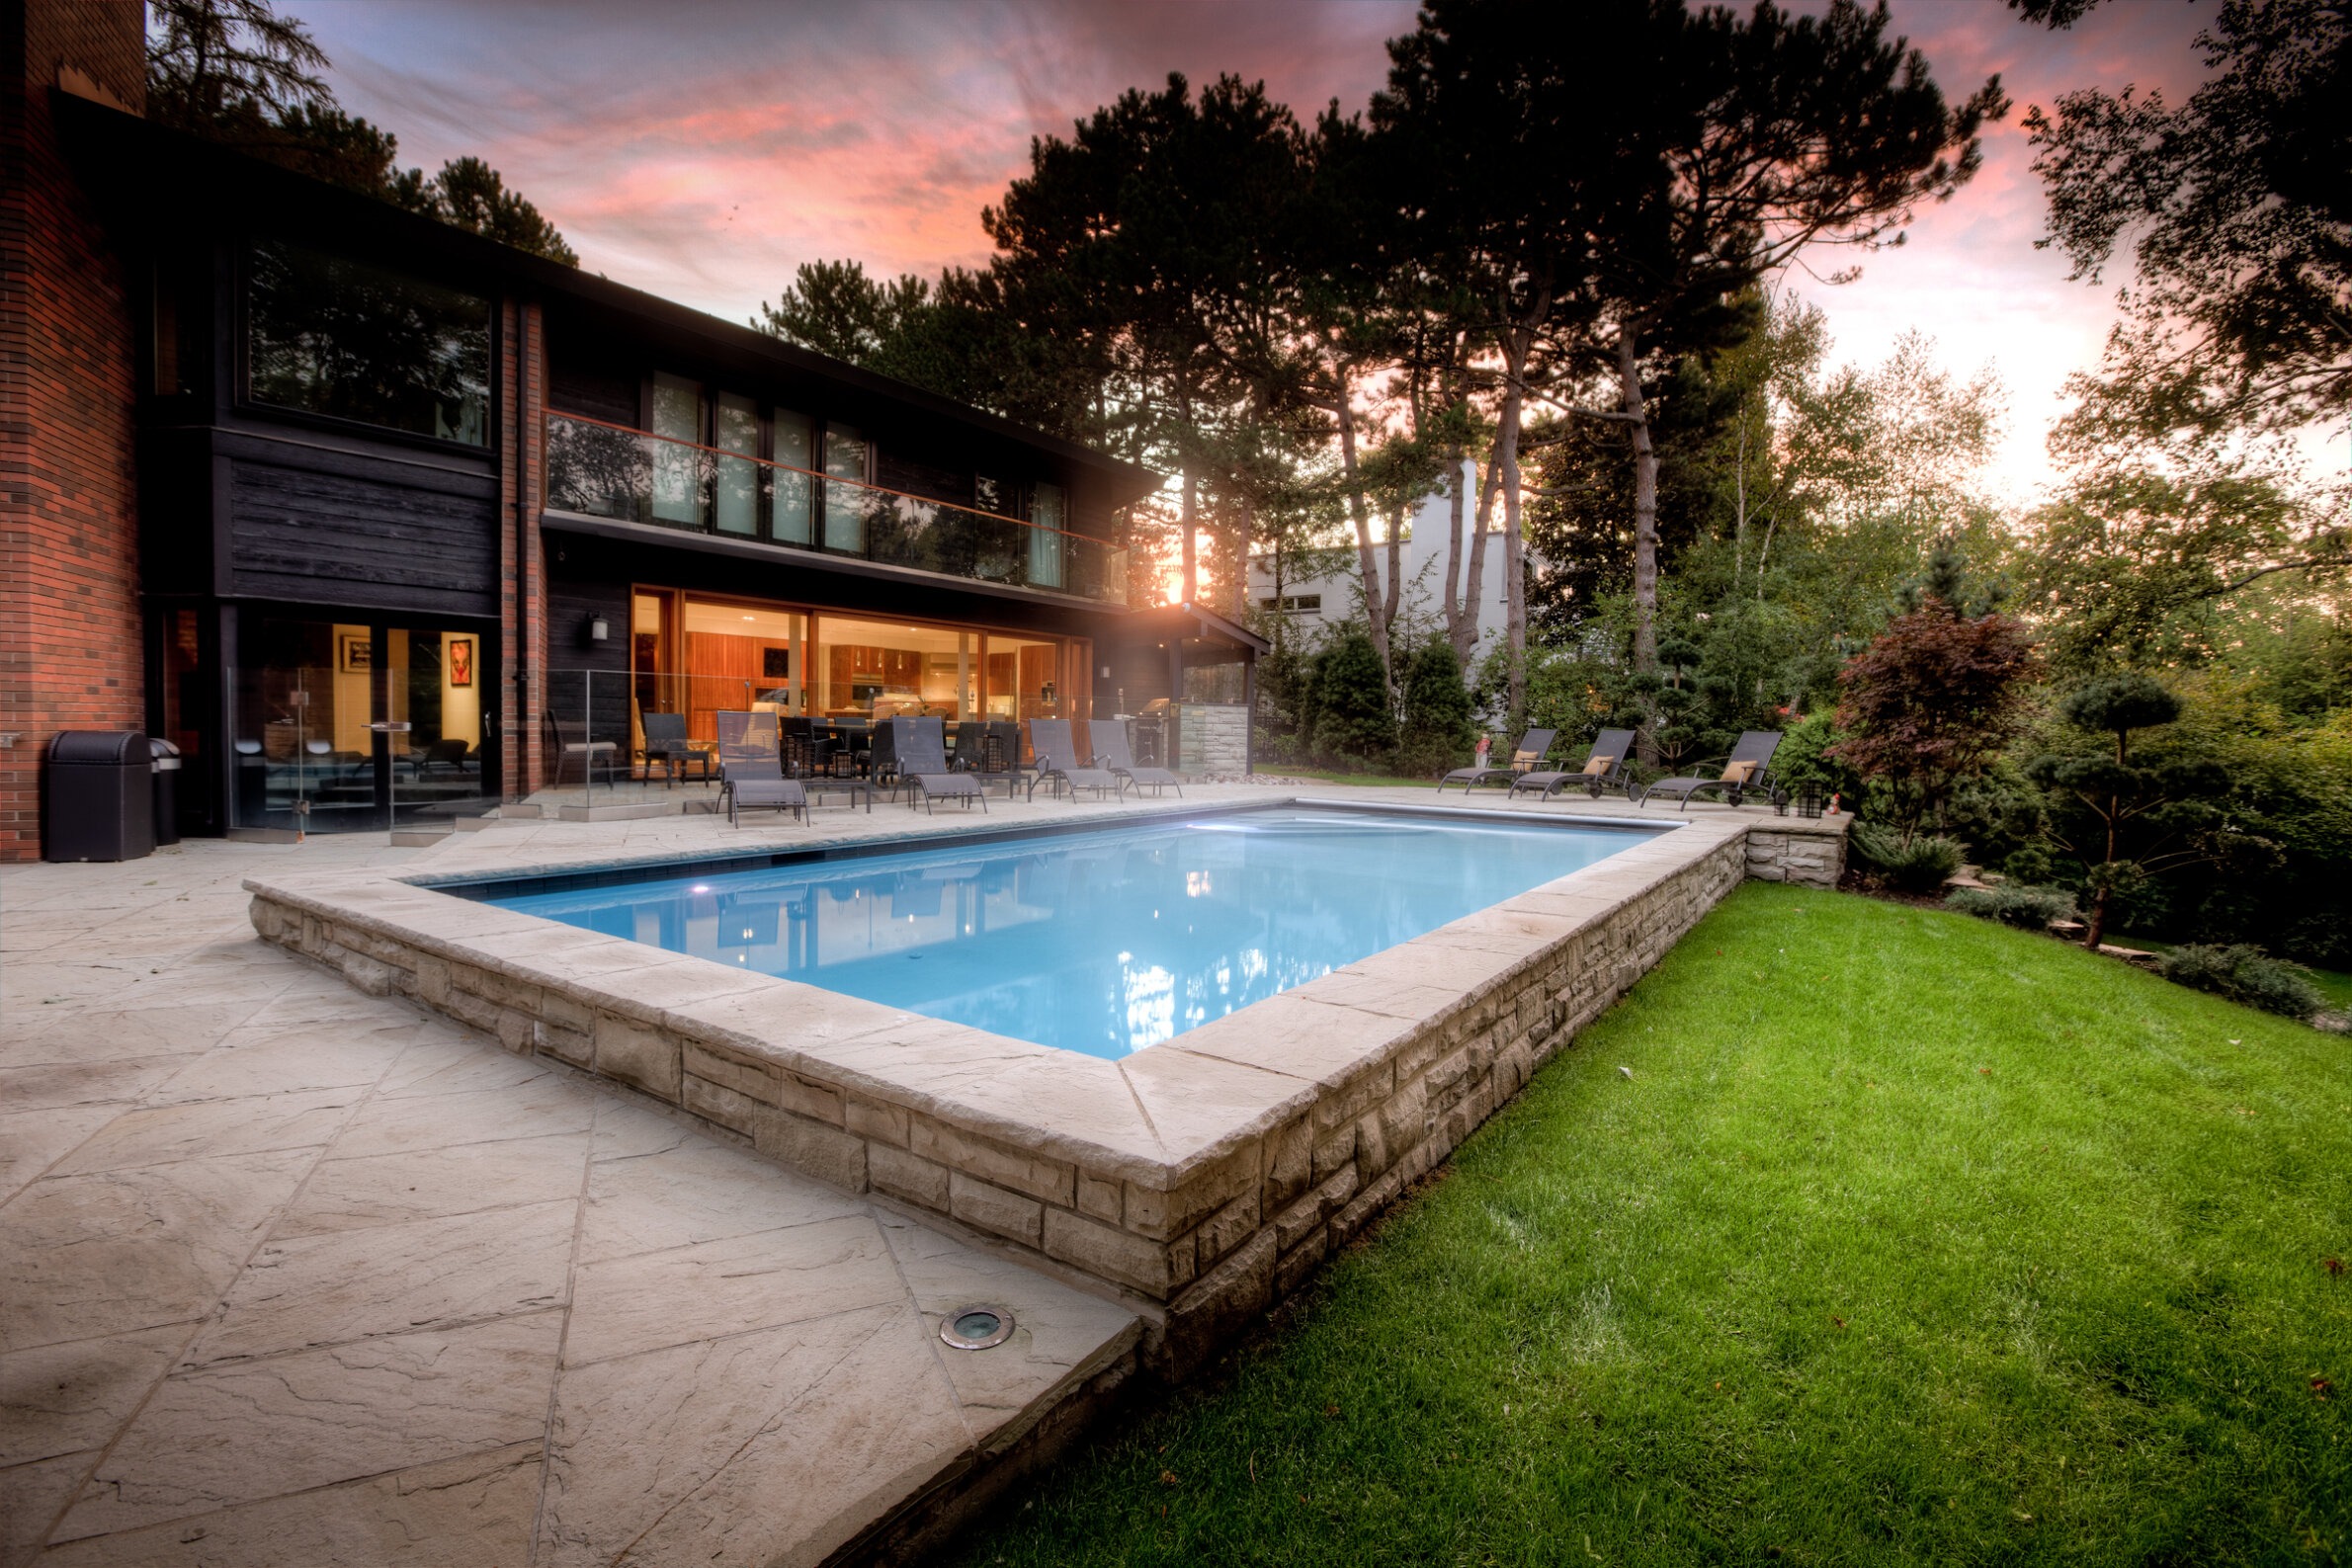 This image shows a luxurious backyard at dusk with a swimming pool, lounge chairs, and a modern house with large windows overlooking a landscaped garden.